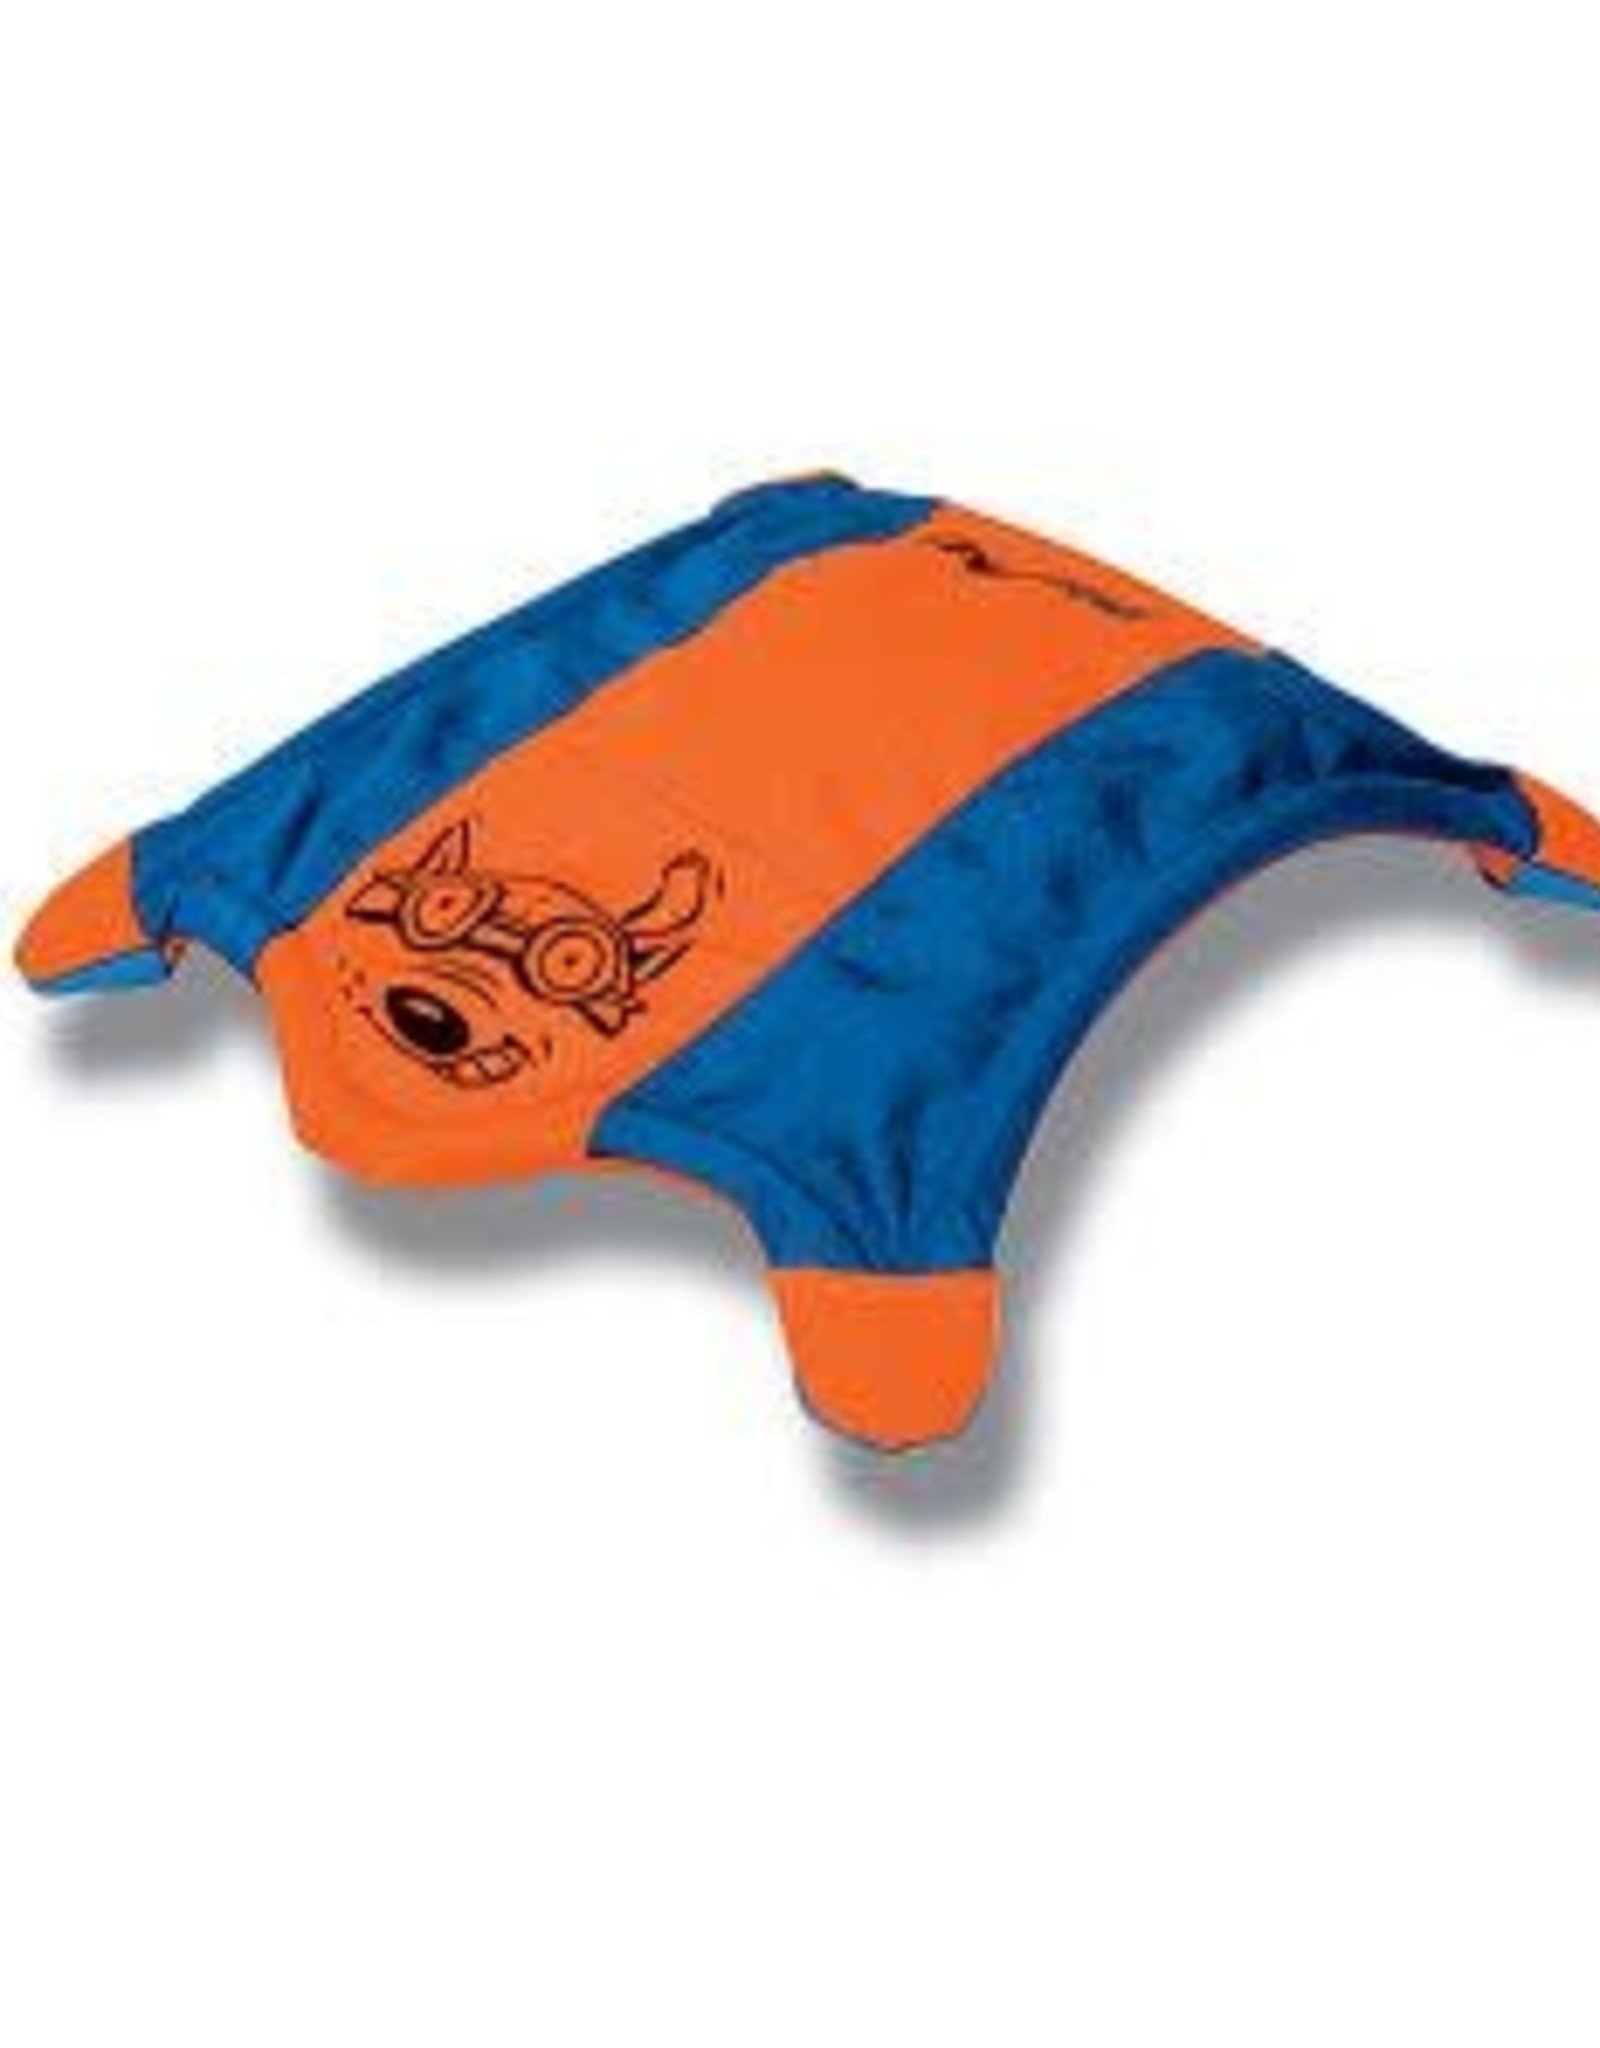 ChuckIt Flying Squirrel Dog Toy- Large